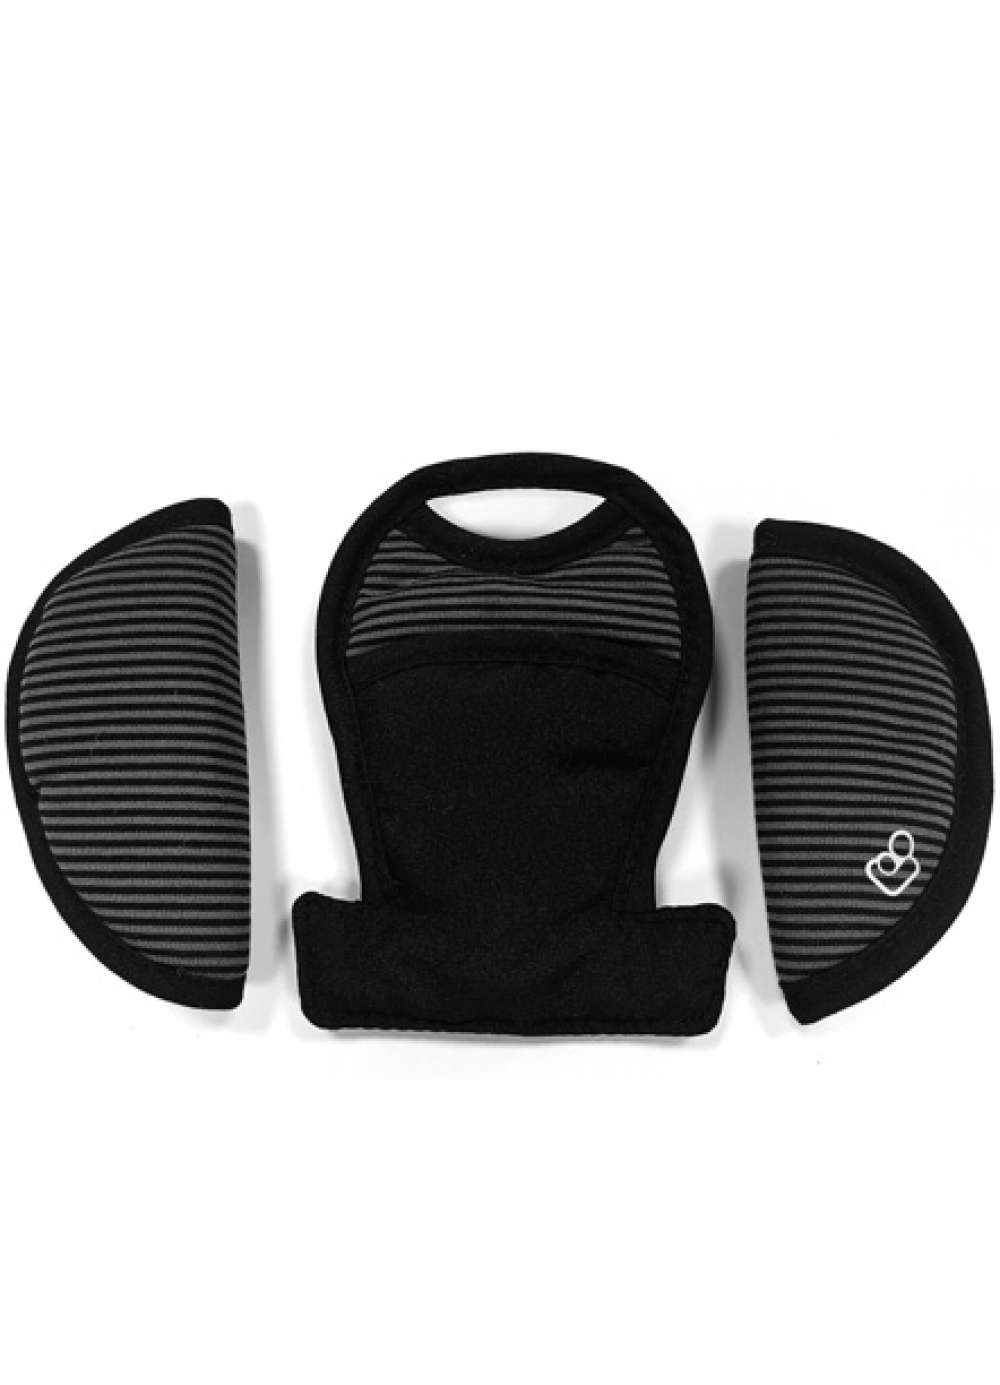 BRAND NEW shoulders & crotch pads to fit MAXI COSI CABRIO  CABRIOFIX CAR SEAT 